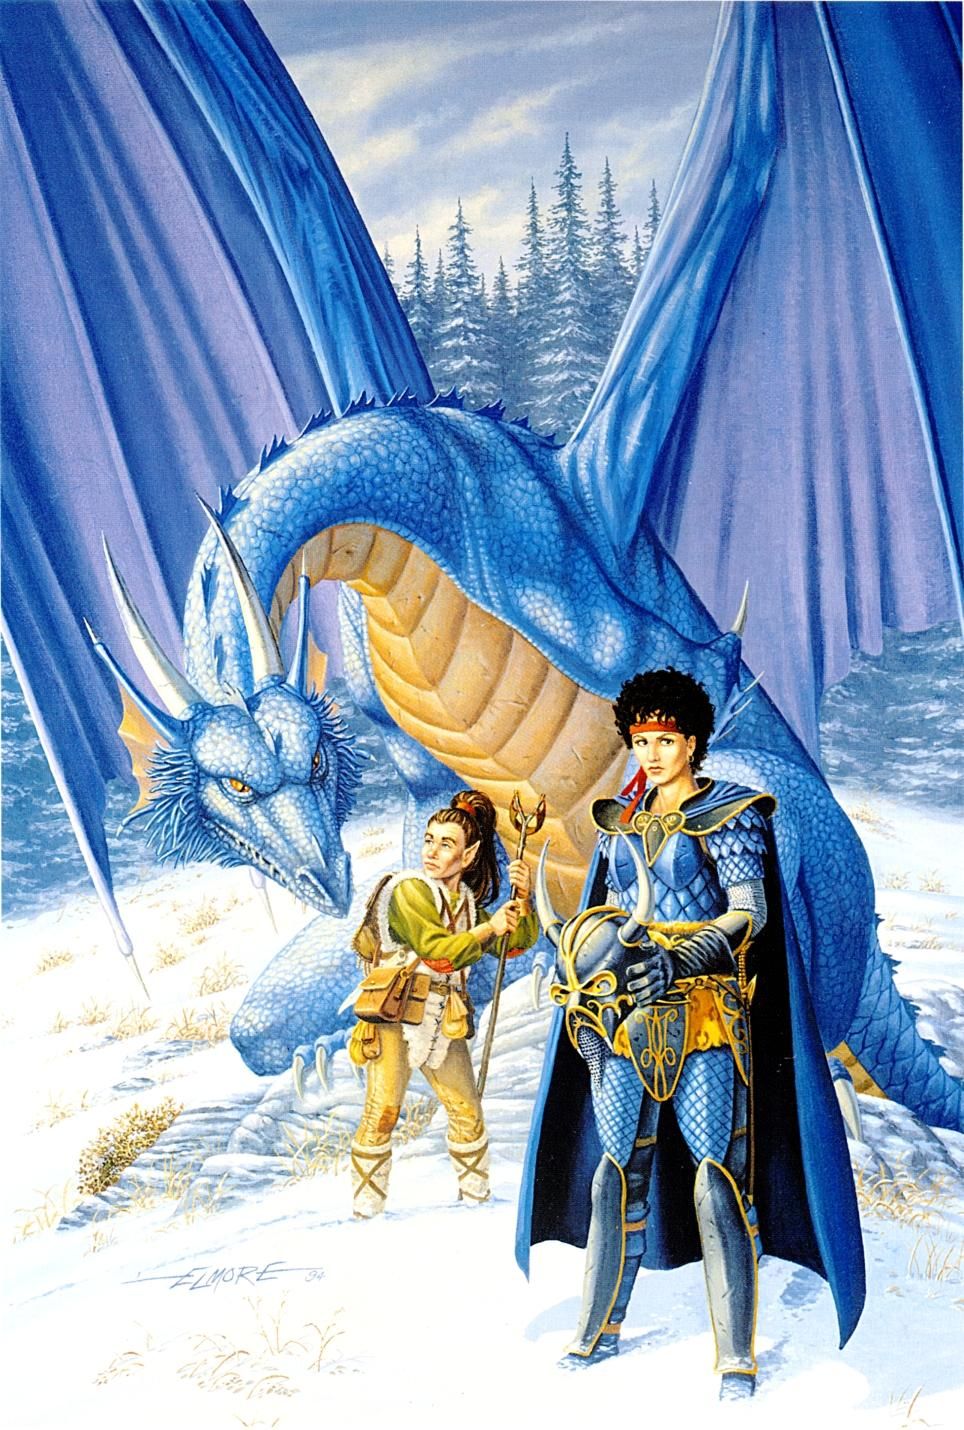 Larry Elmore art of Tas and Kitiara from the Masters of Dragonlance art book. (Image: Wizards of the Coast)